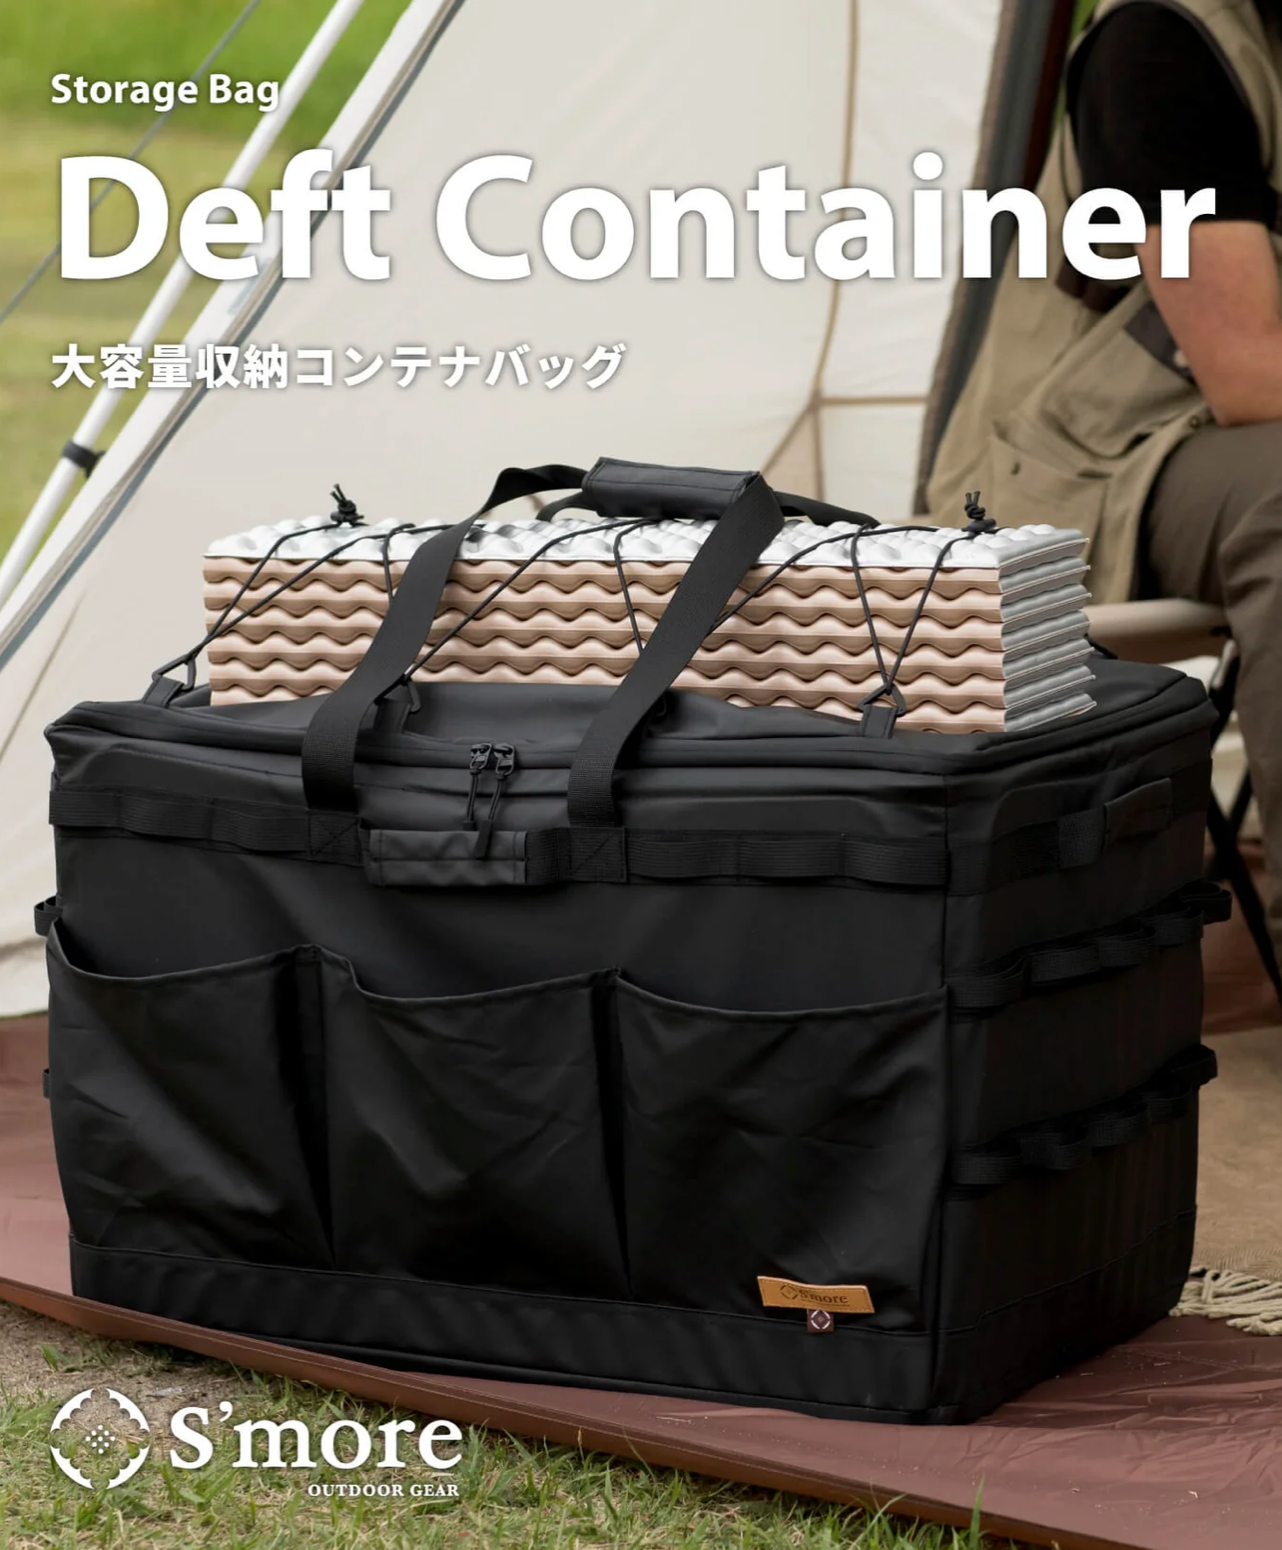 Deft Container大型收納包